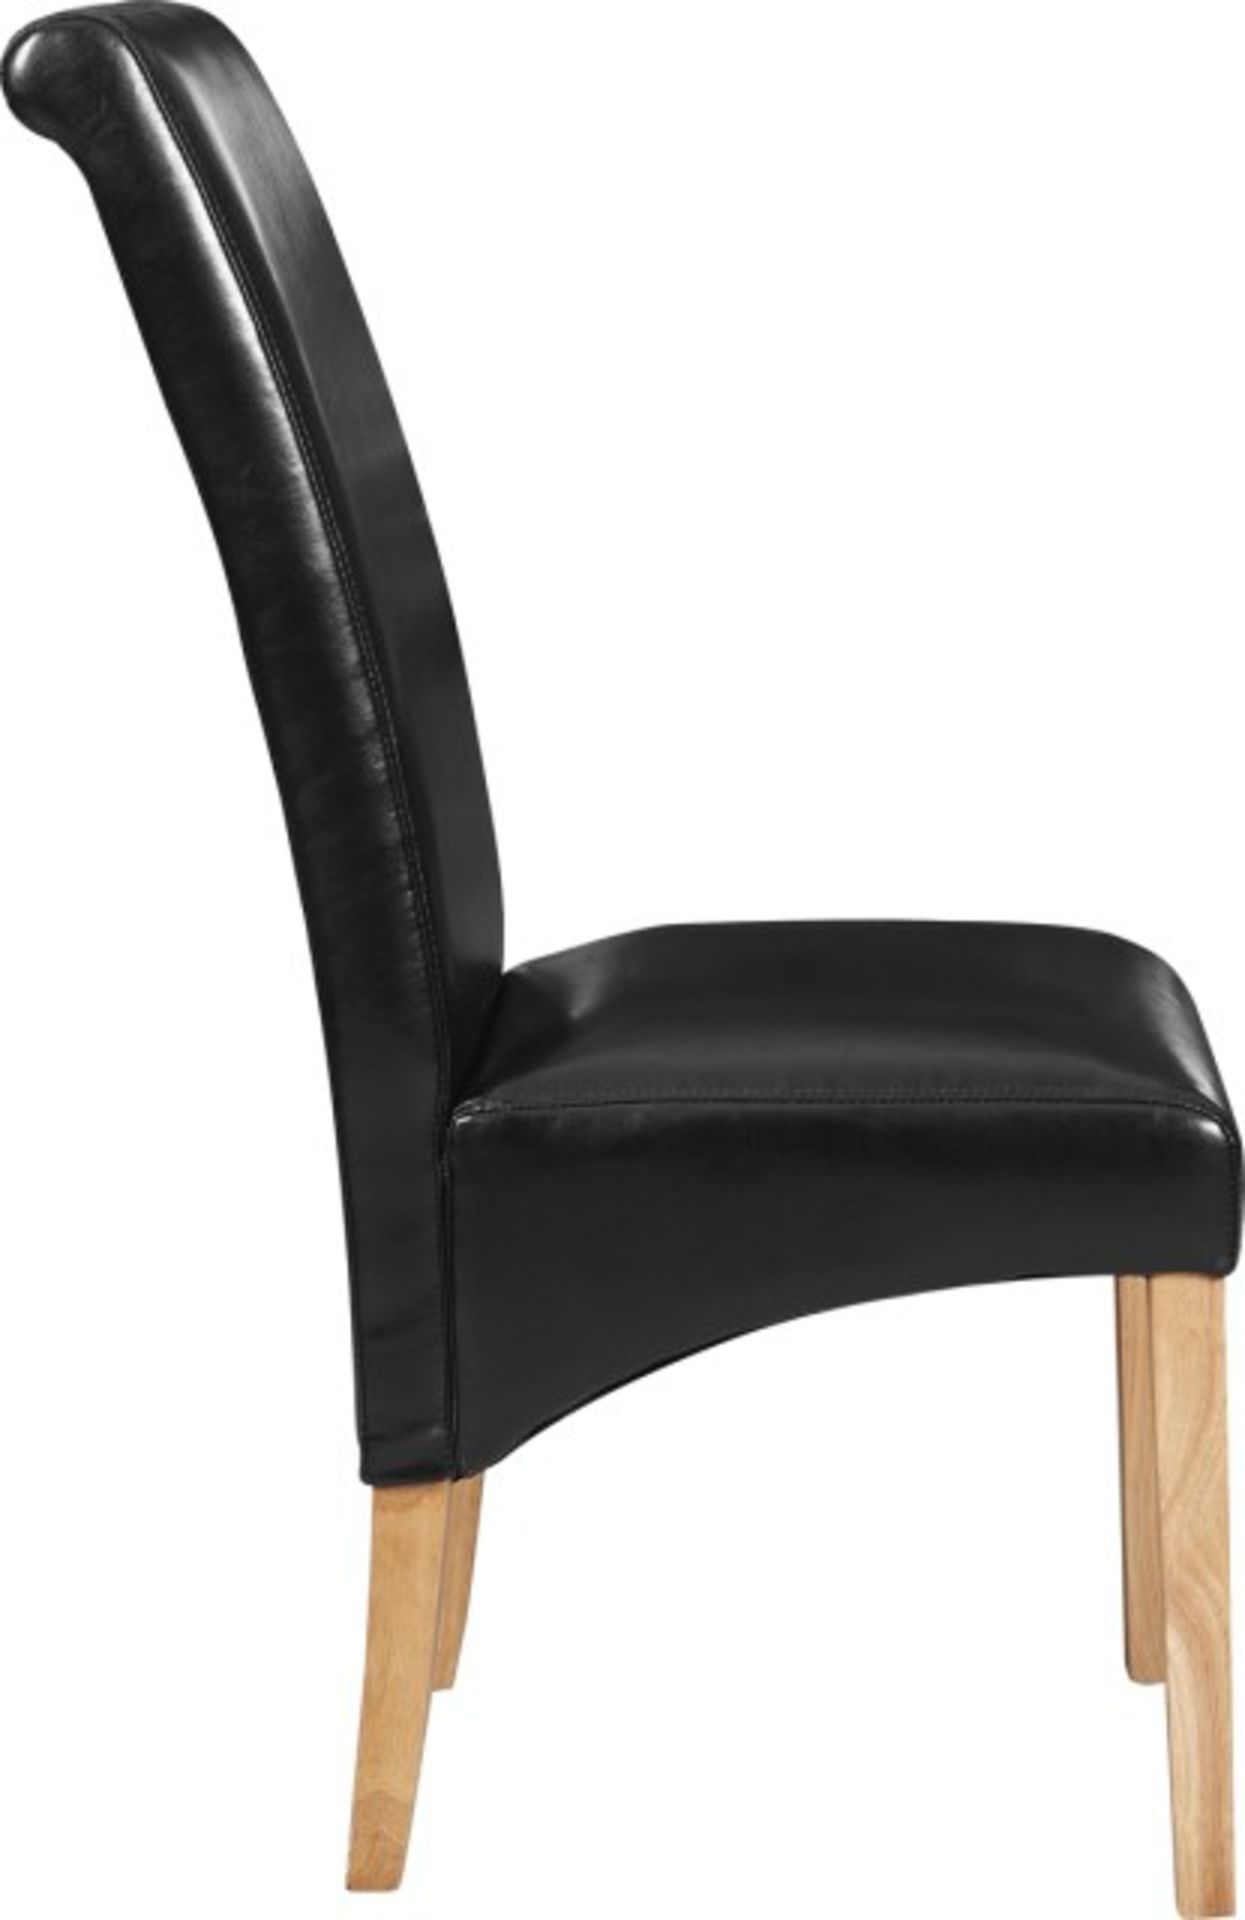 V Grade A Black PU Leather Dining Chair